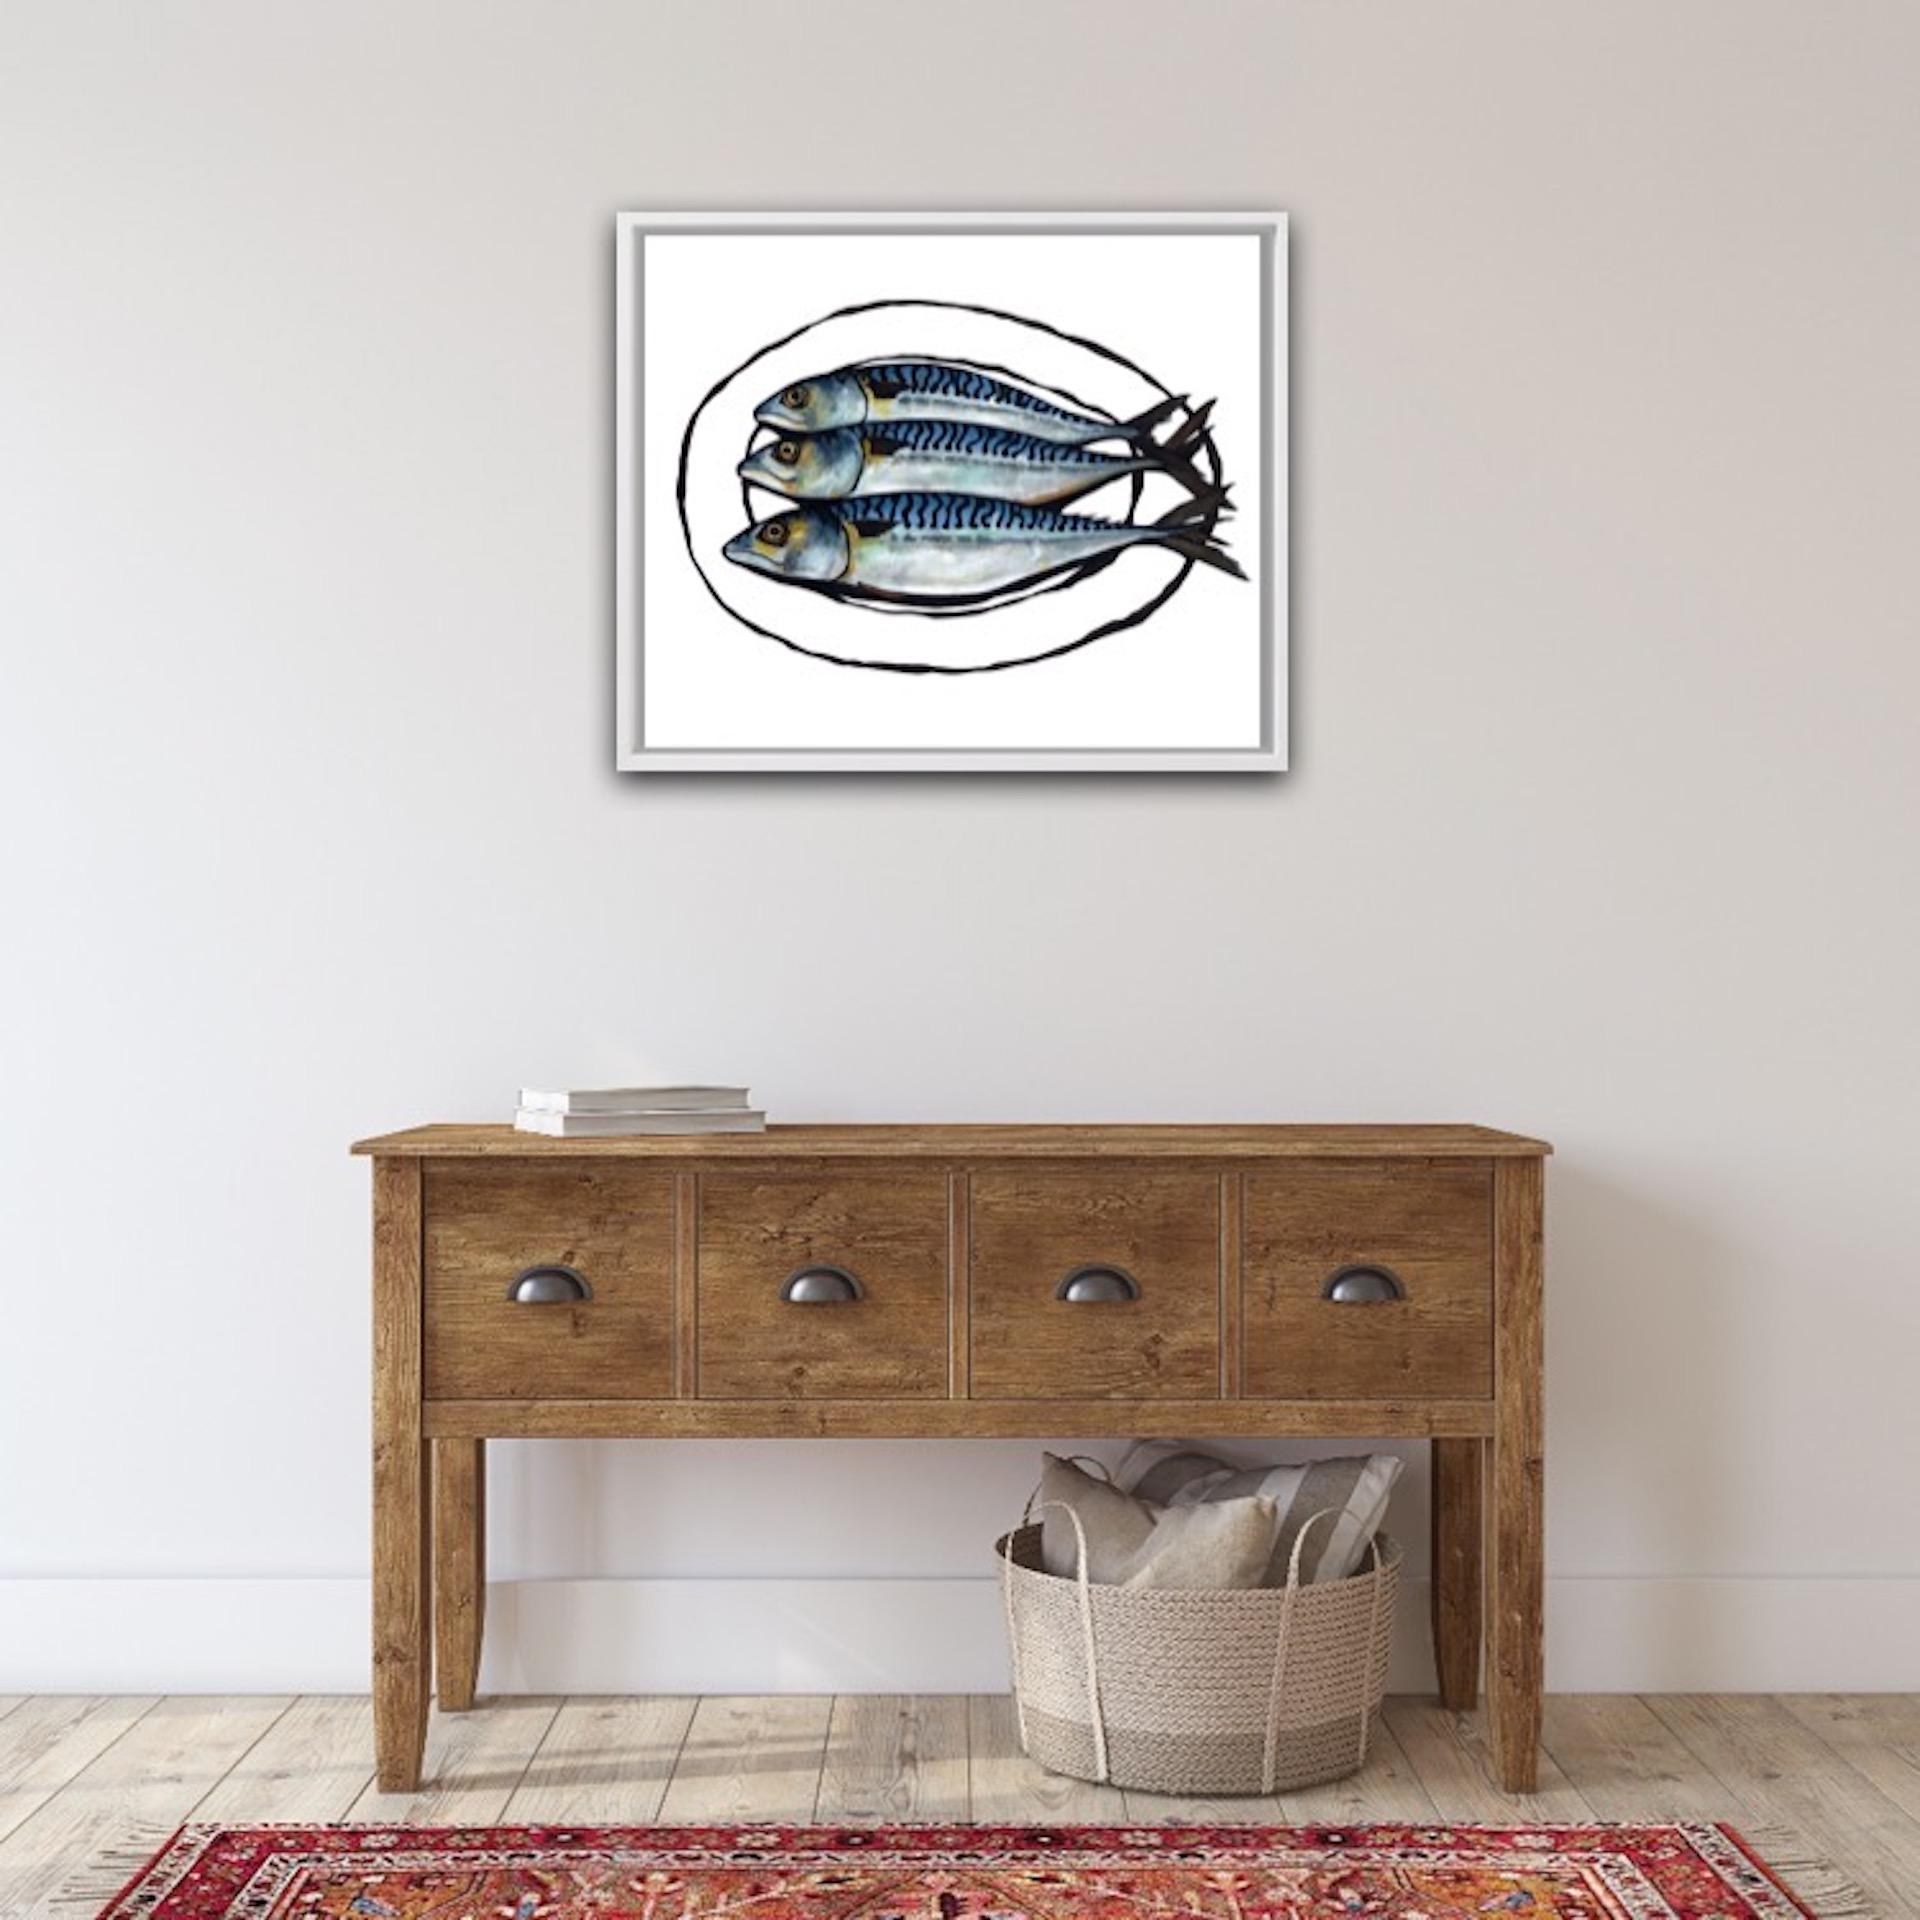 Lucy Routh, Three Mackerel, Limited Edition Print, Contemporary Still Life Art 4